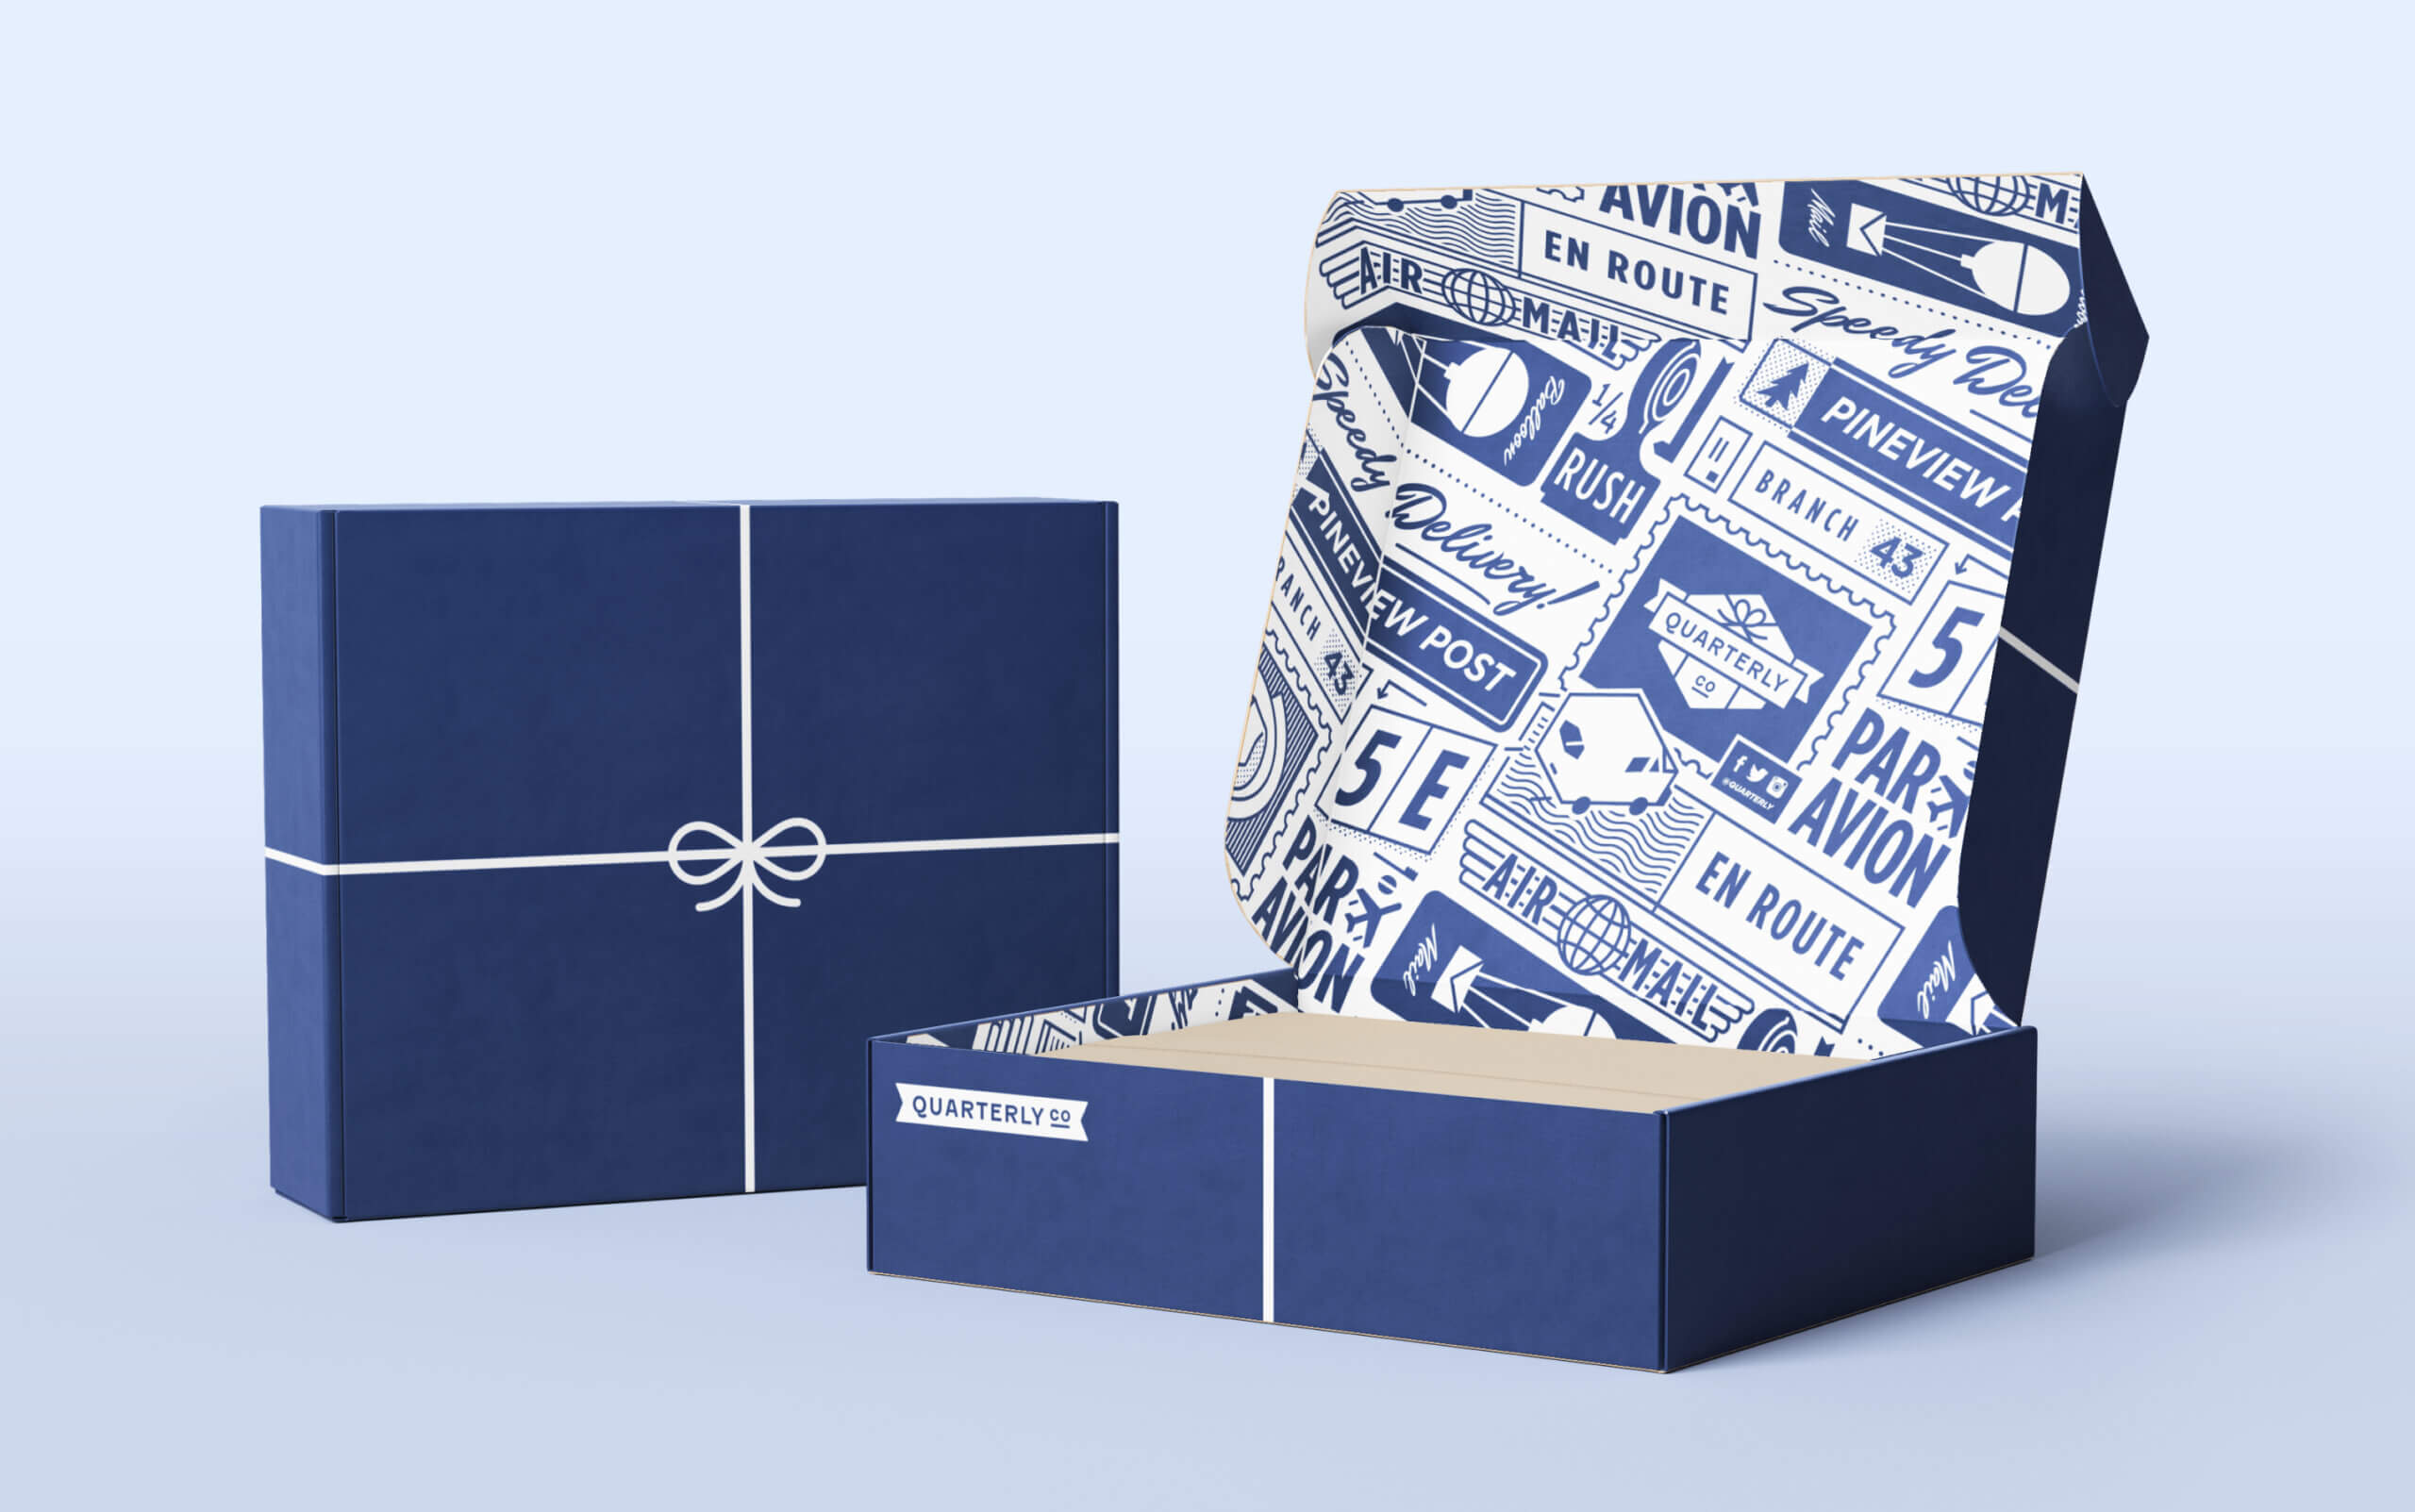 Quarterly_Packaging_02